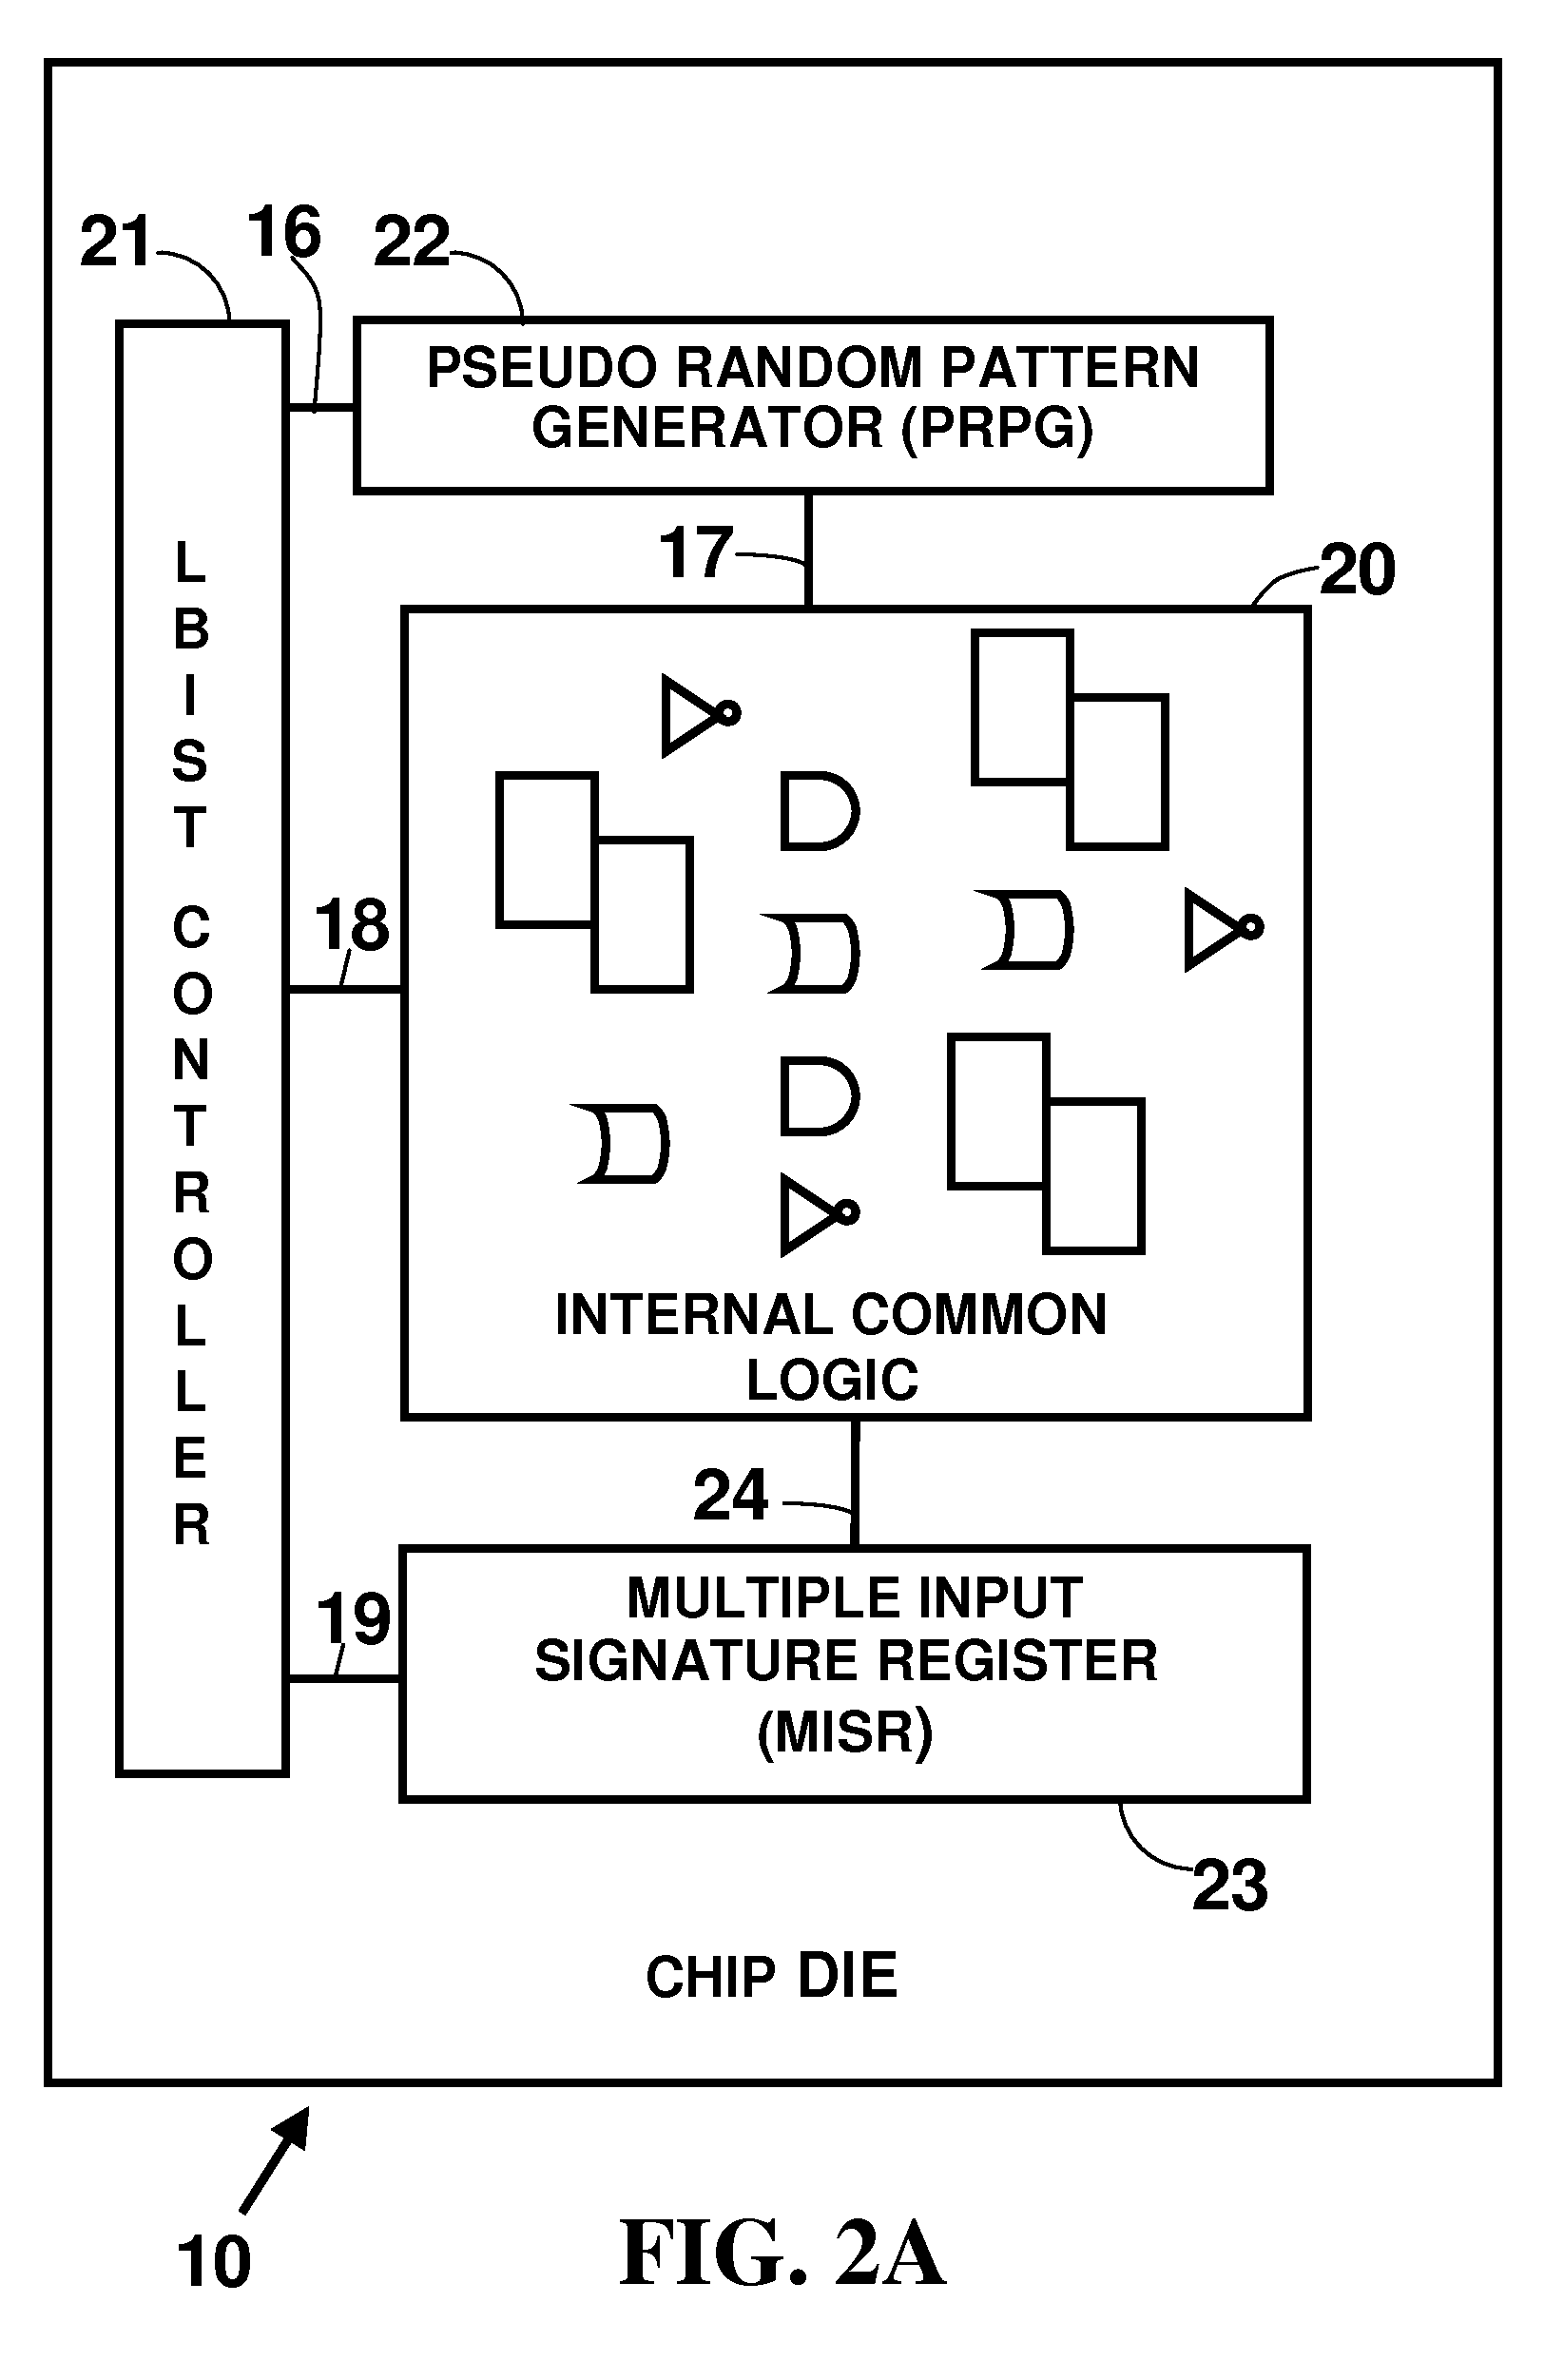 Method and system for formal verification of partial good self test fencing structures